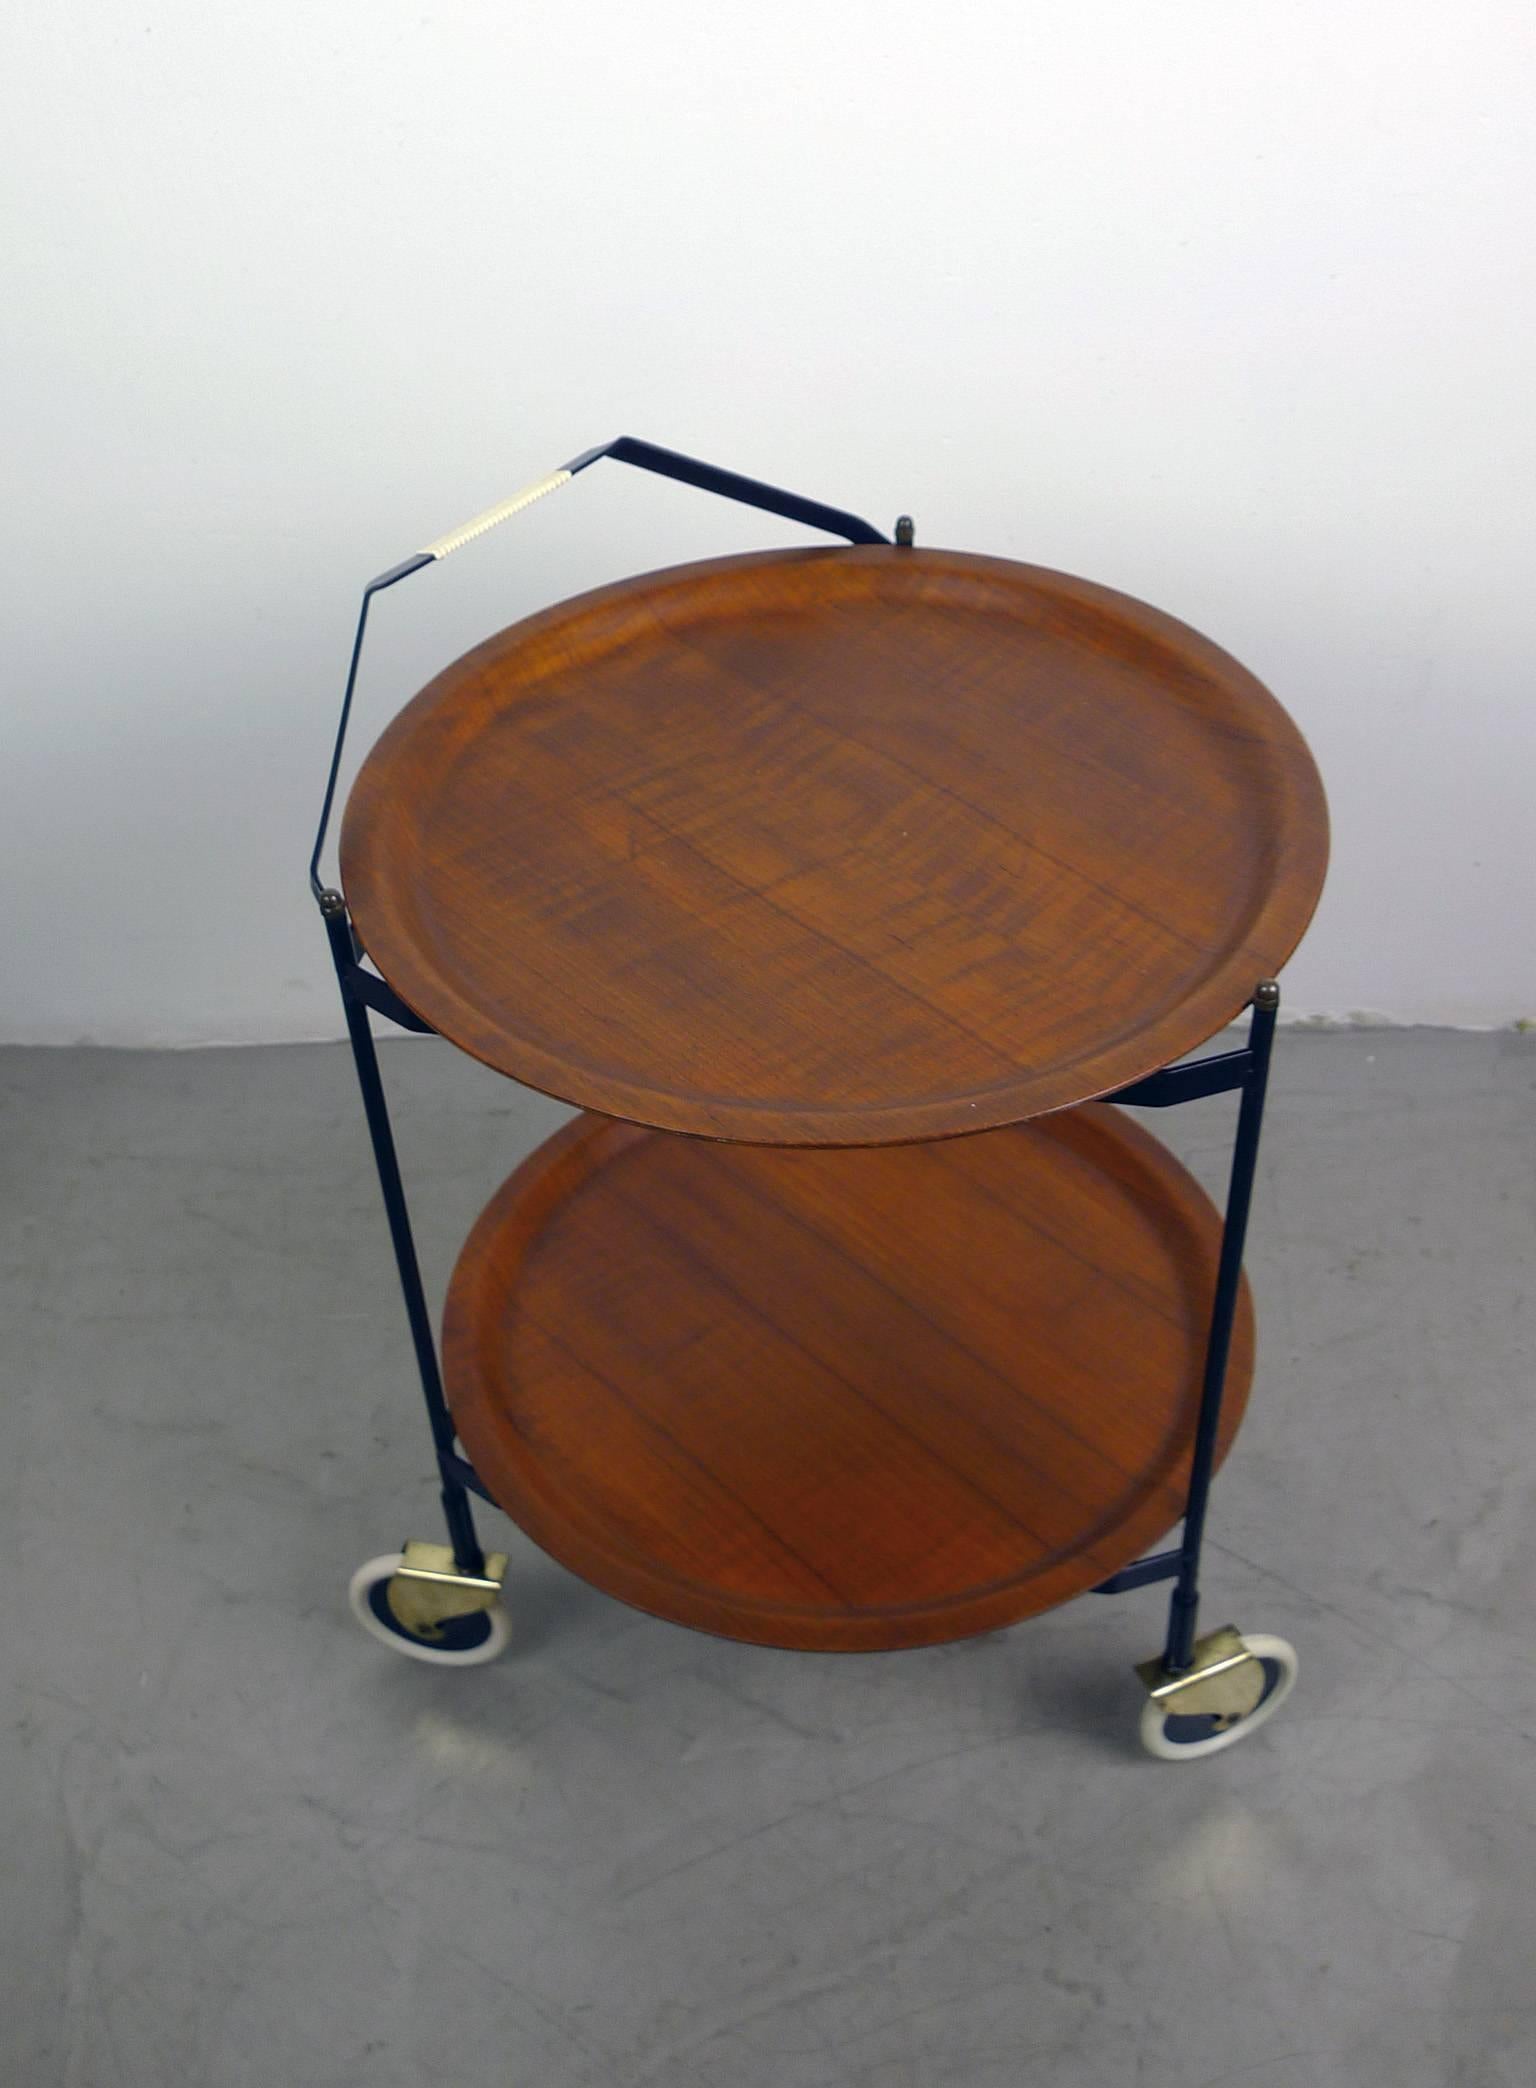 This mobile tea trolley with two removable round teak trays has a black lacquered metal frame that is foldable for space-saving storage. The three rolling feet are fixed to the rack by brass elements. It was produced in the 1950s in Denmark and is